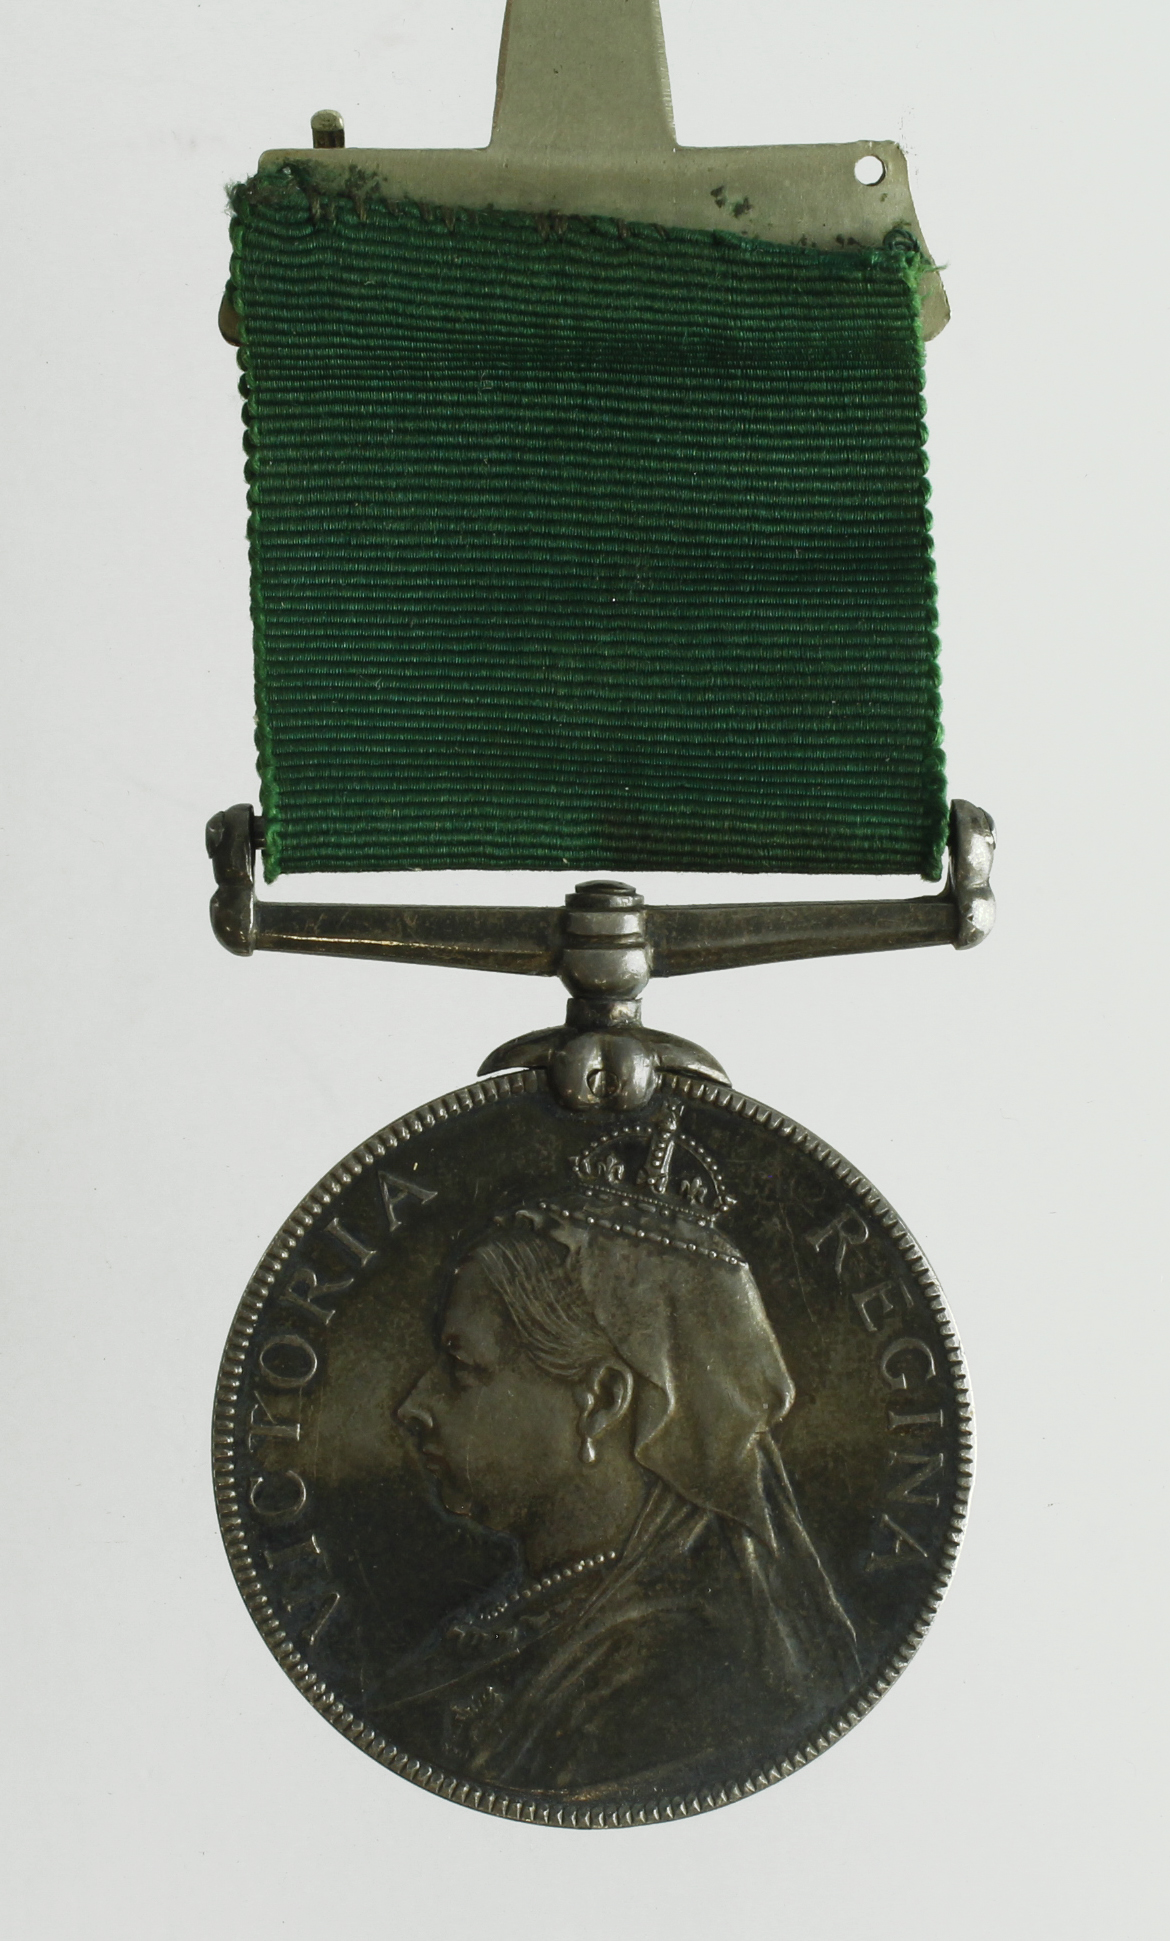 Volunteer Force LS Medal QV unnamed as issued